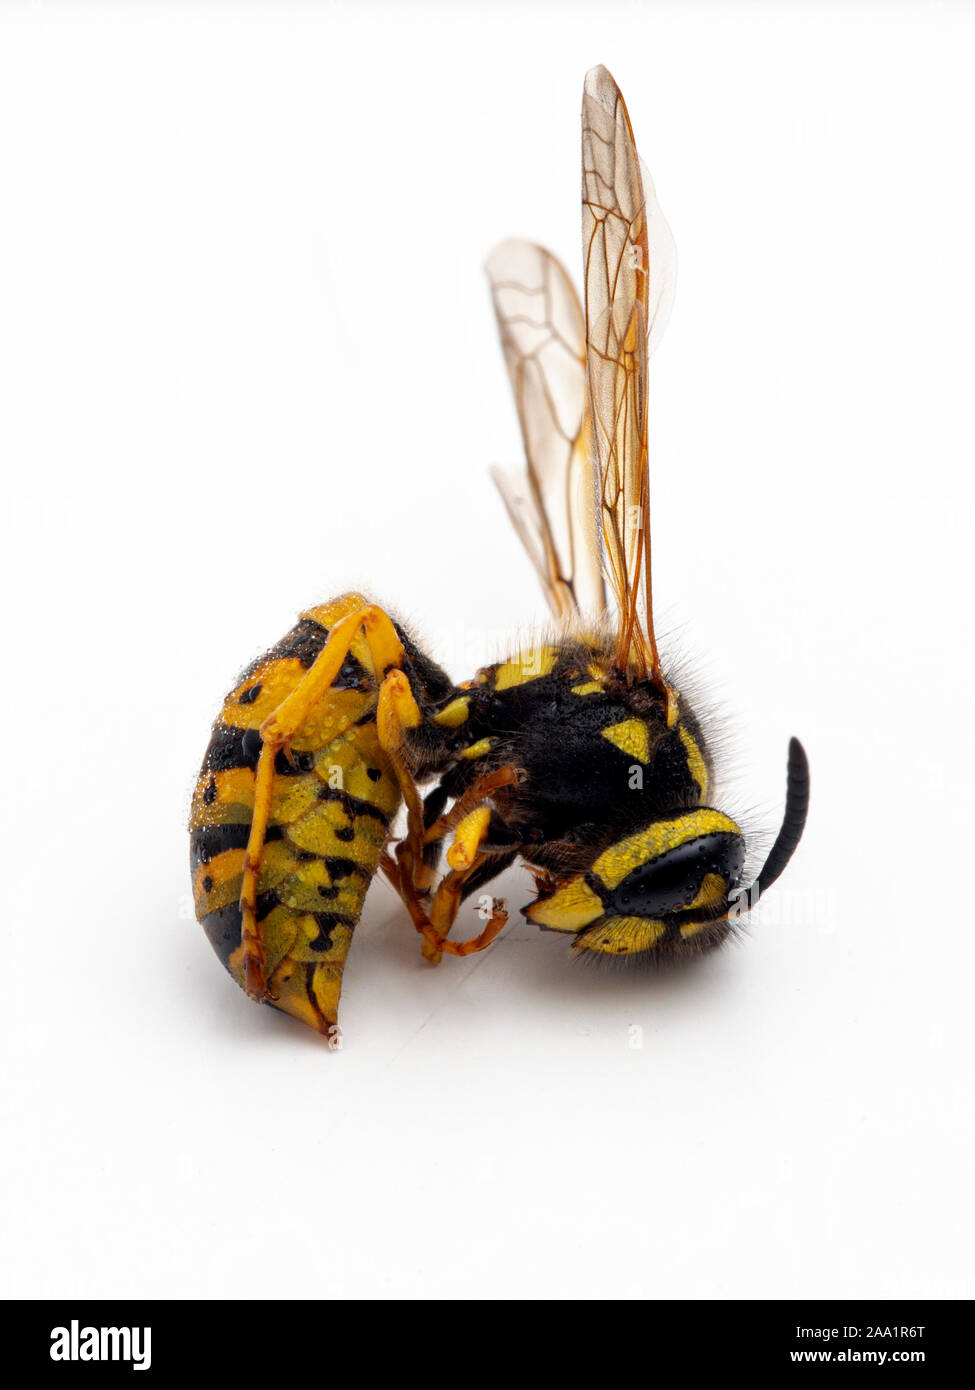 dead aerial yellowjacket wasp, Dolichovespula arenaria, with water droplets, isolated Stock Photo